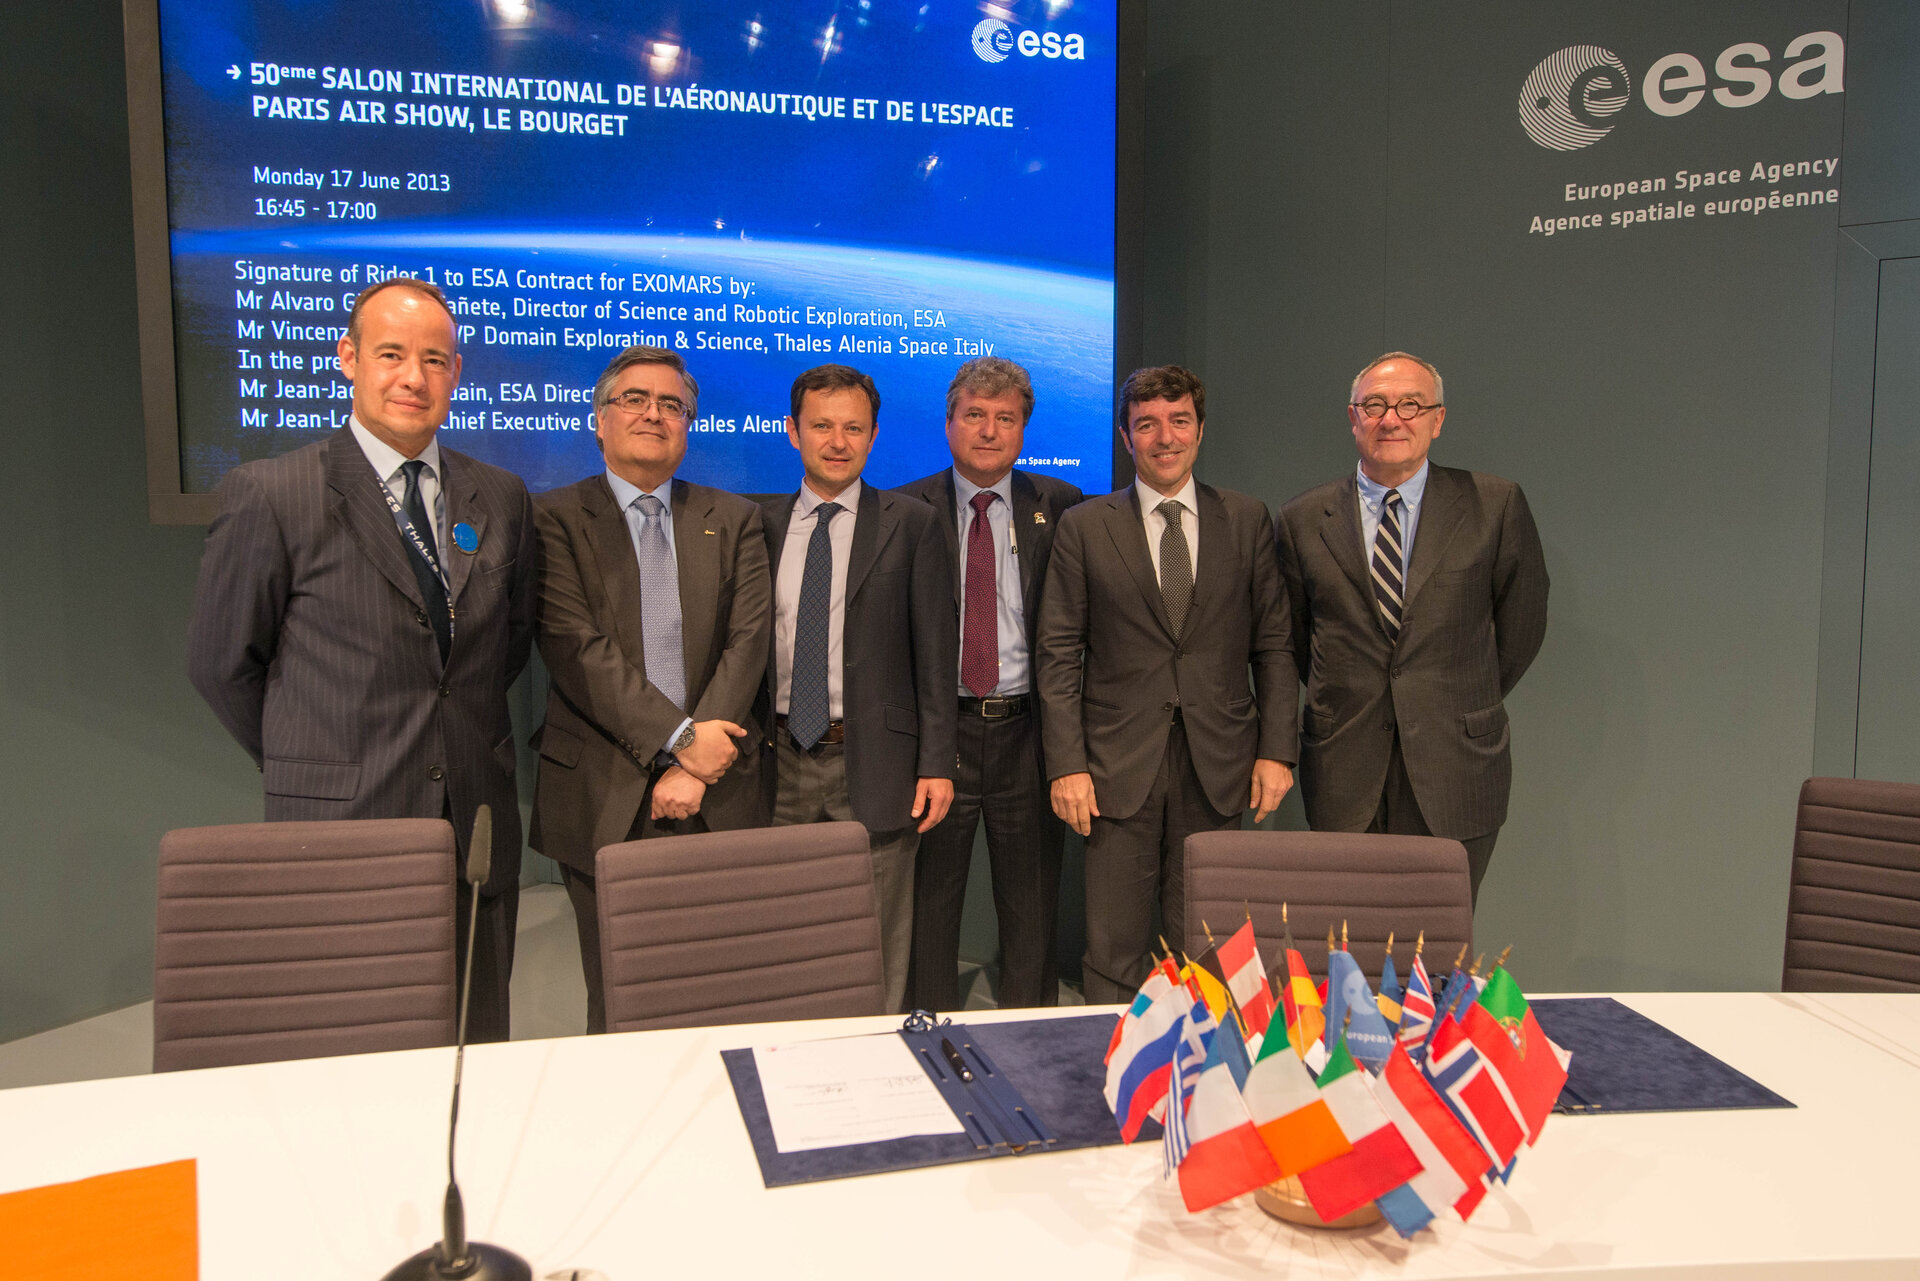 Signature of Rider 1 to ESA Contract for Exomars 